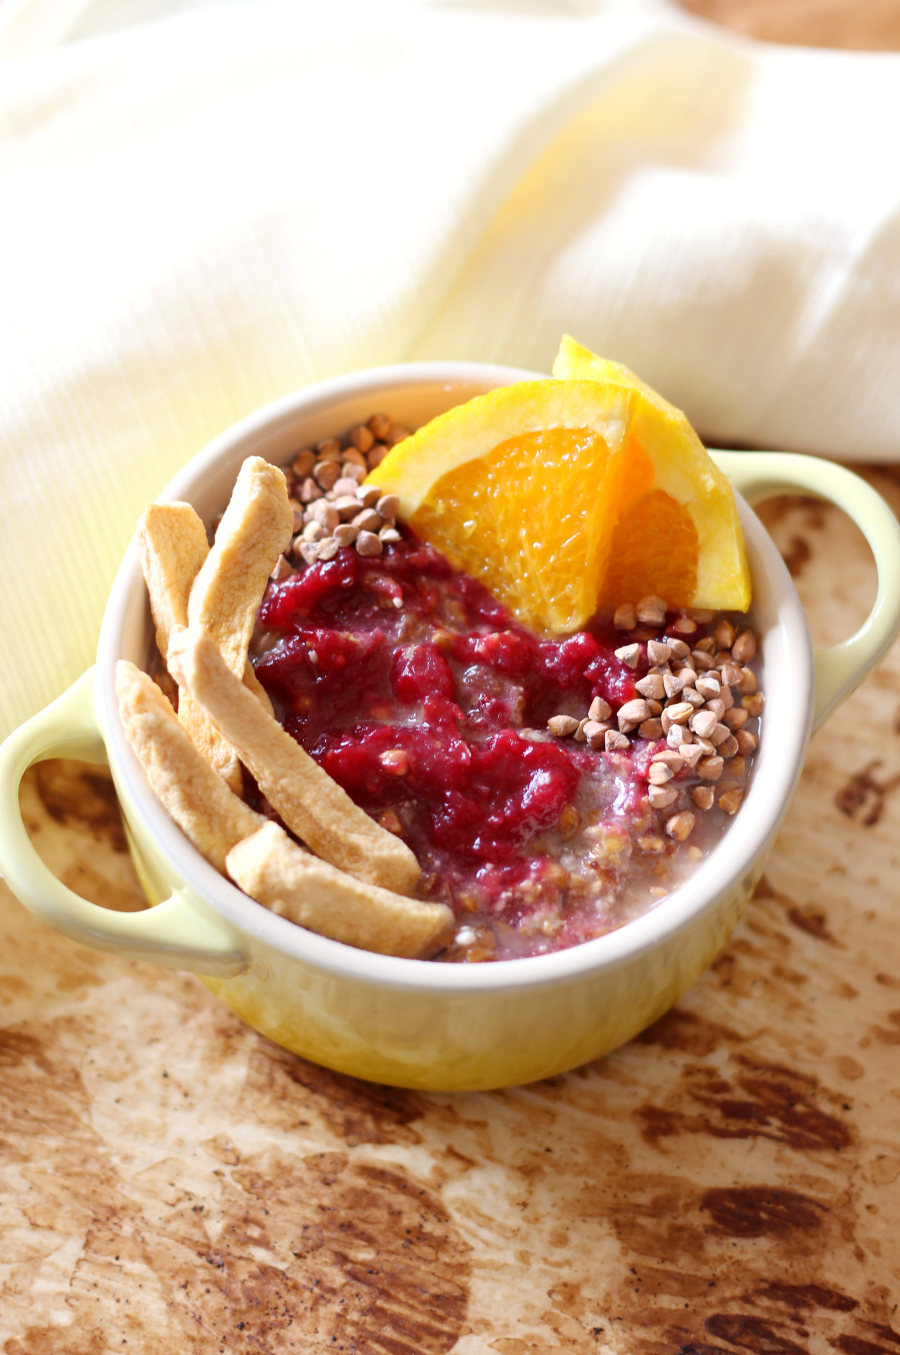 Raw Winter Kasha Porridge | Strength and Sunshine @RebeccaGF666 A cozy Raw Winter Kasha Porridge for when you're looking for some wholesome nourishment to start your day! With seasonal flavors and homemade cranberry sauce, this gluten-free, vegan, and allergy-free breakfast is sure to be a new favorite!